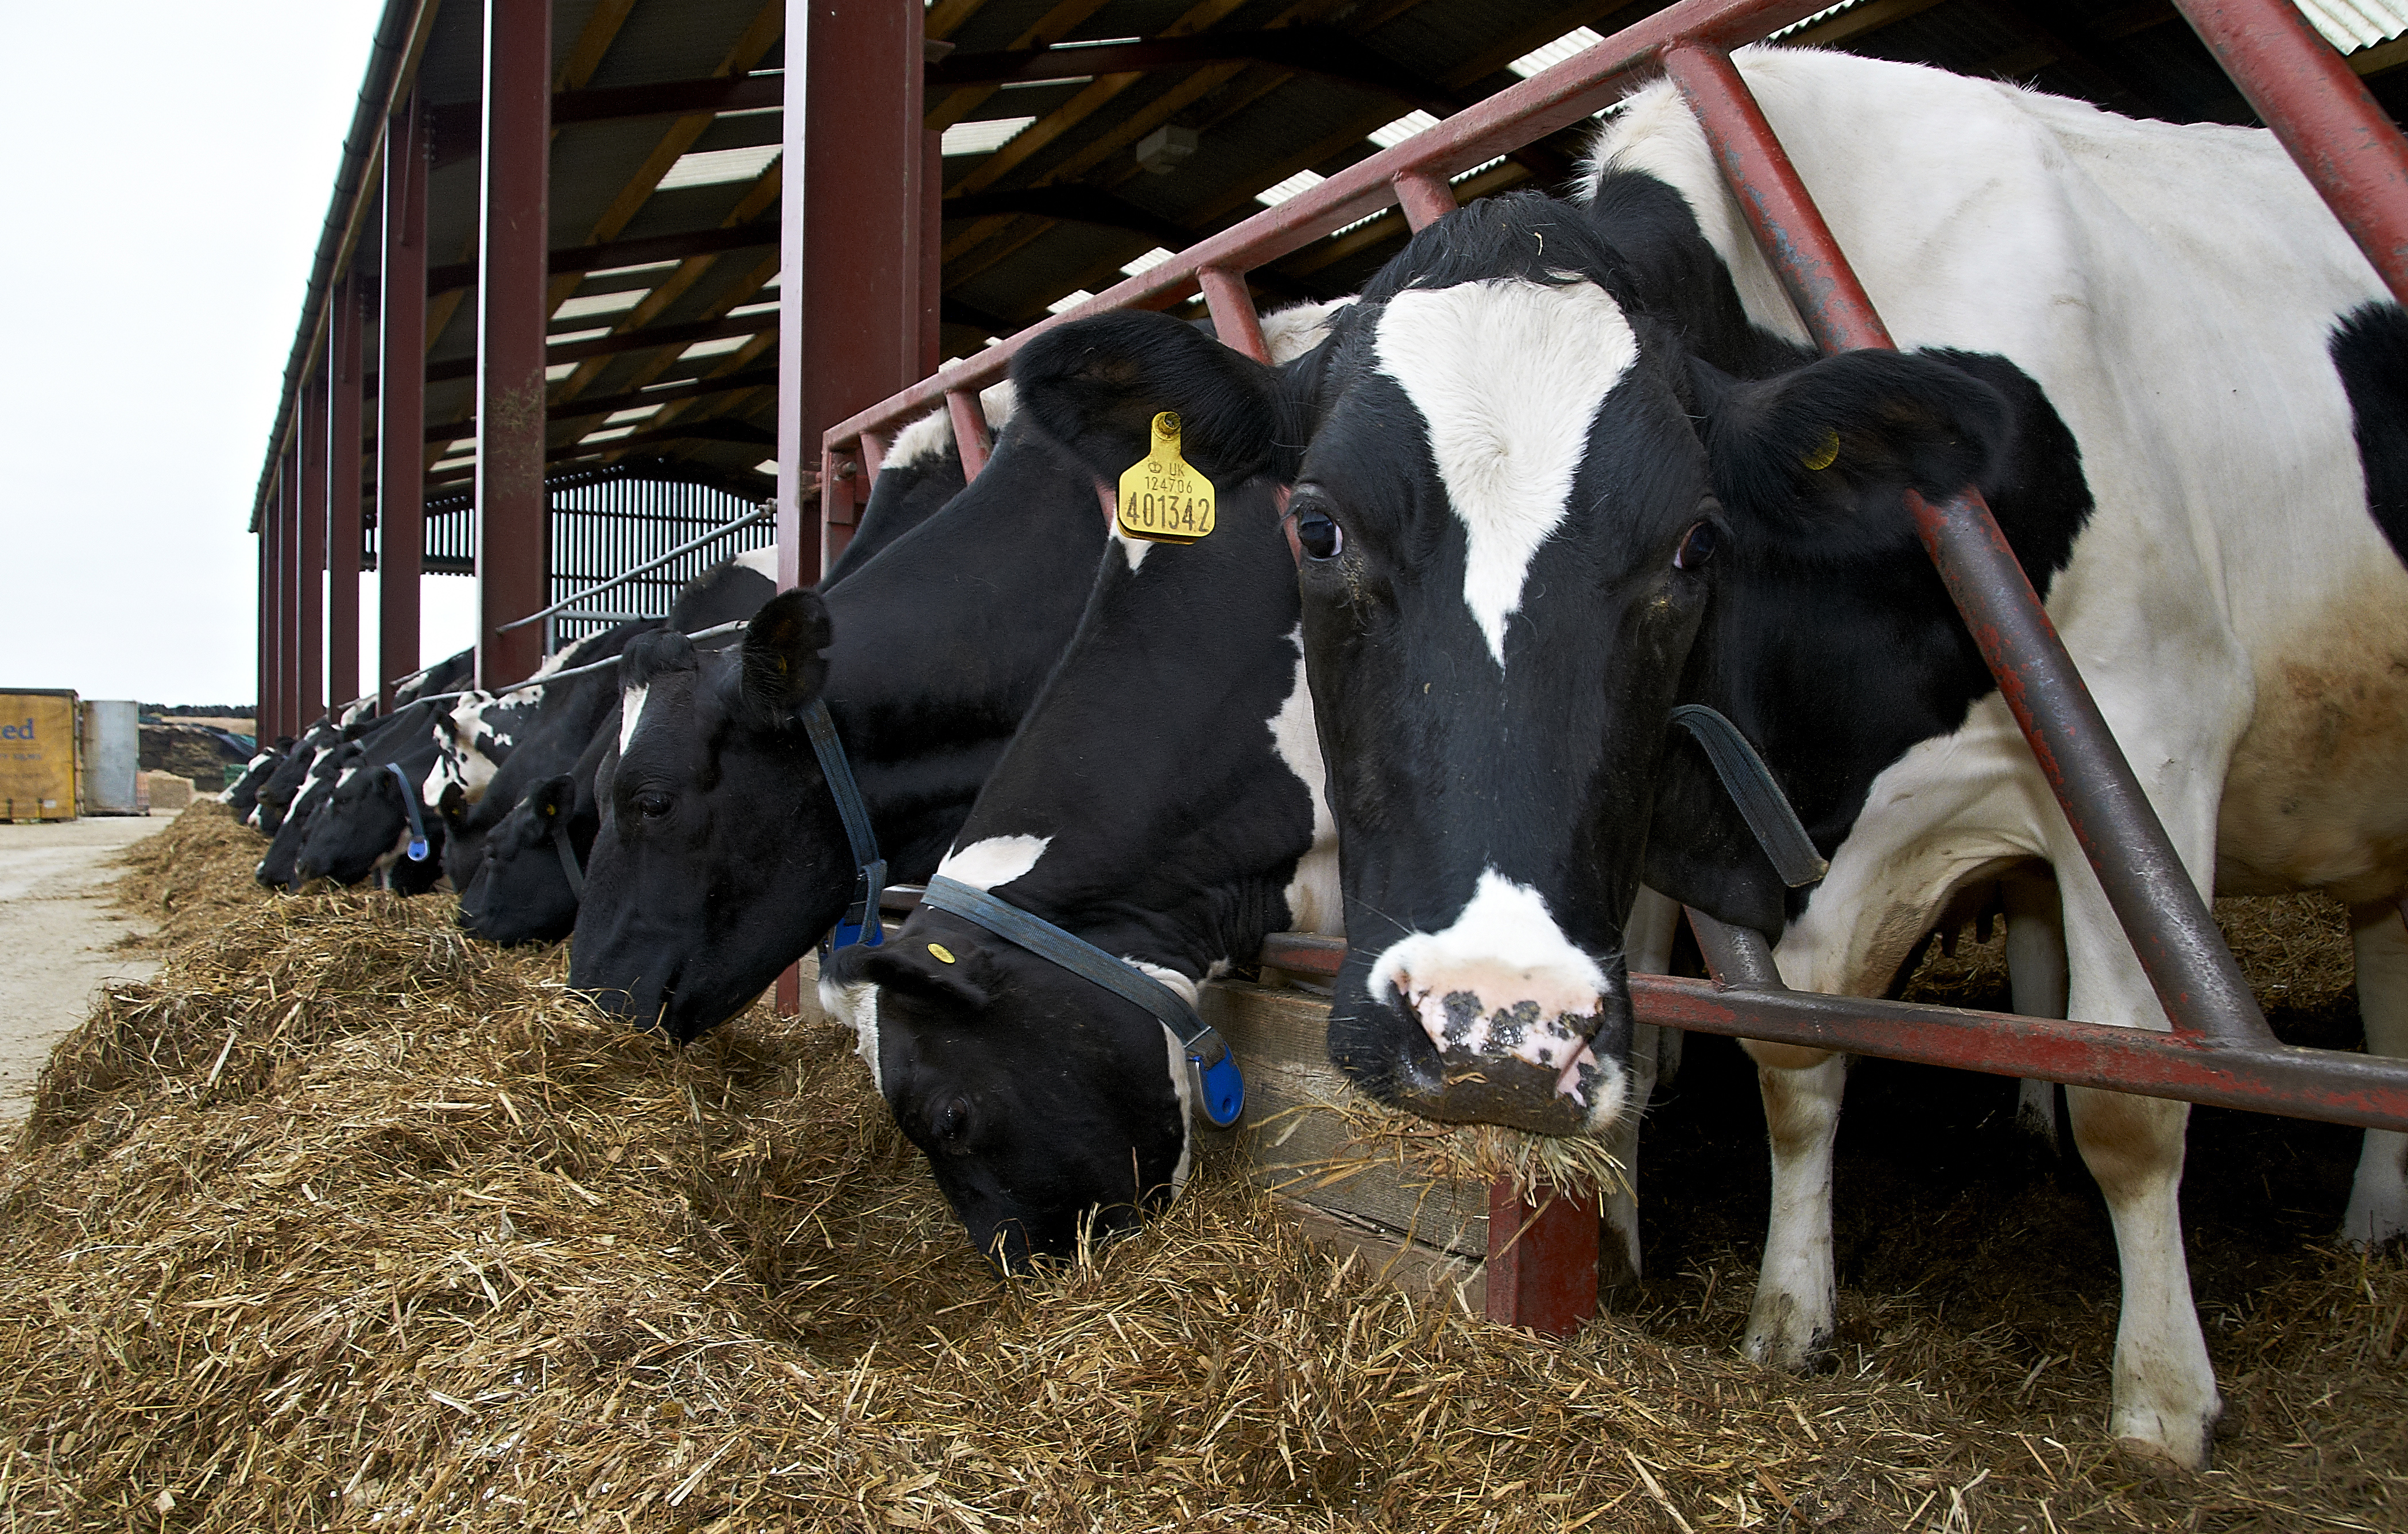 Super greens: why silage is great for dairy cows (and dairy farmers)